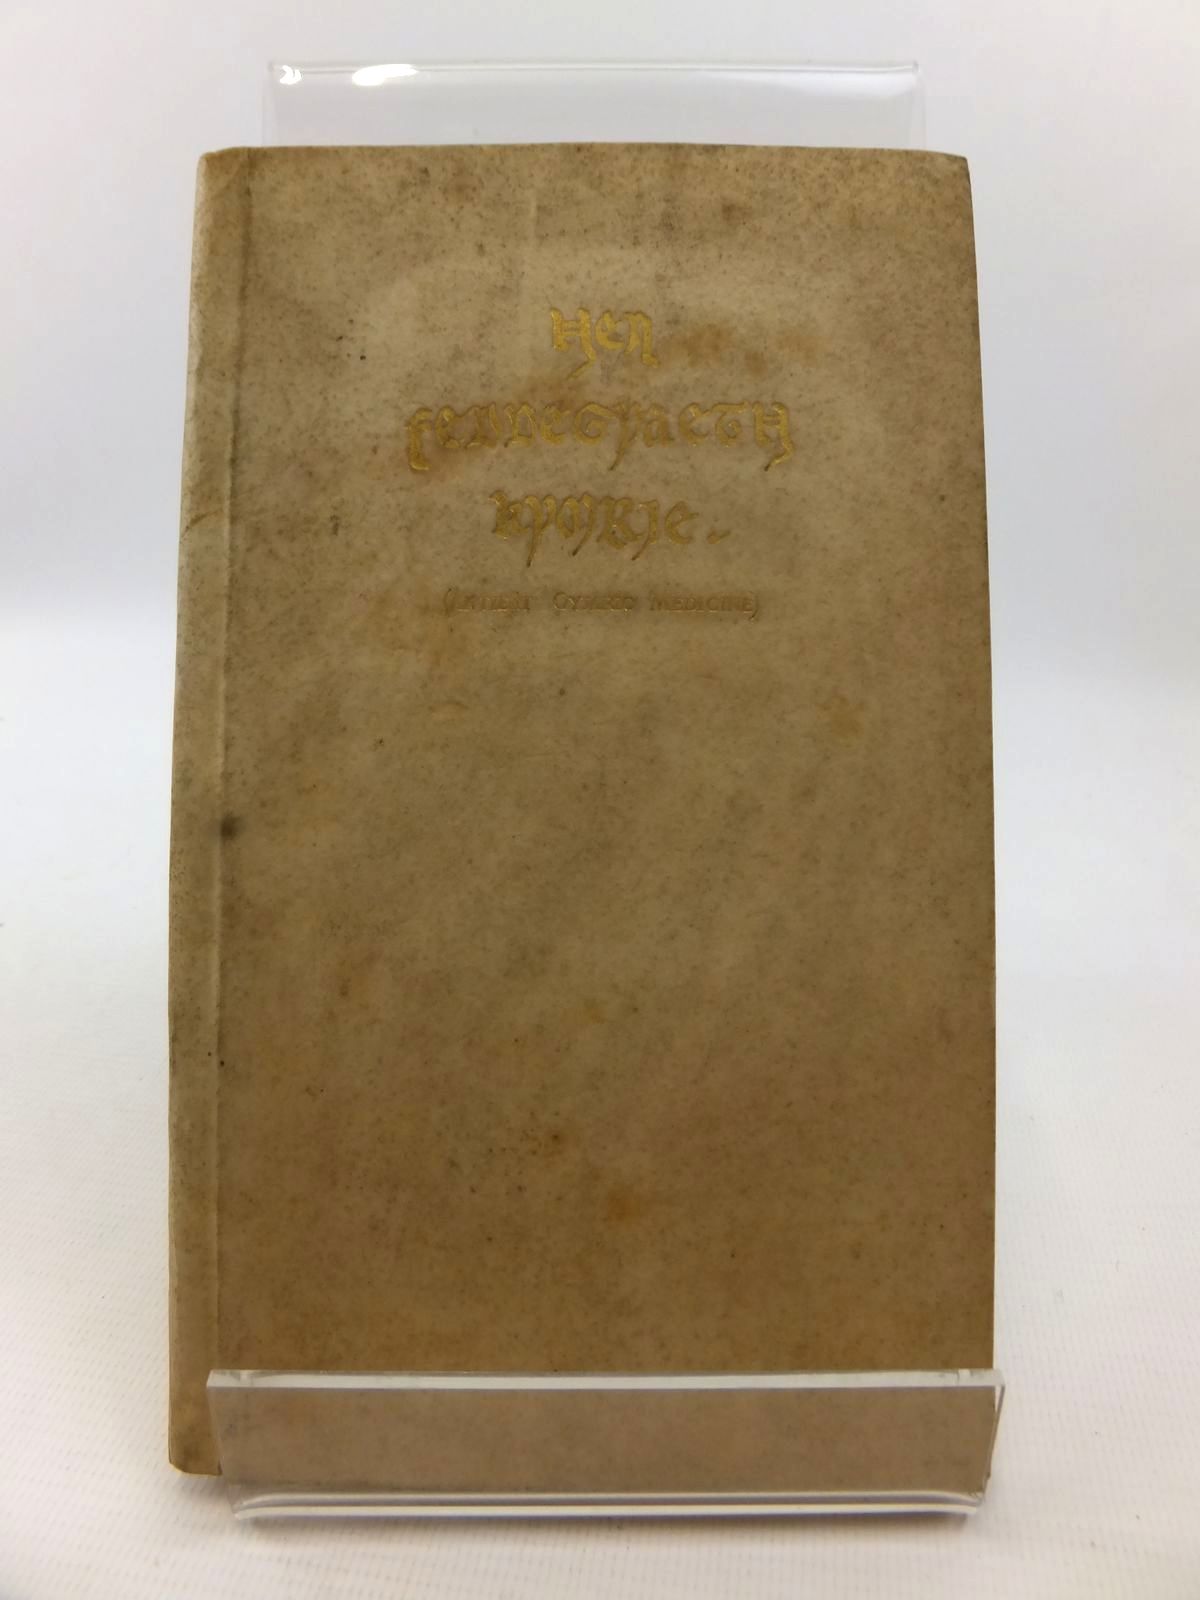 Photo of HEN FEDDEGYAETH KYMRIE (ANTIENT CYMRIC MEDICINE) written by Wellcome, Henry S. published by Burroughs Wellcome And Col. (STOCK CODE: 1812841)  for sale by Stella & Rose's Books